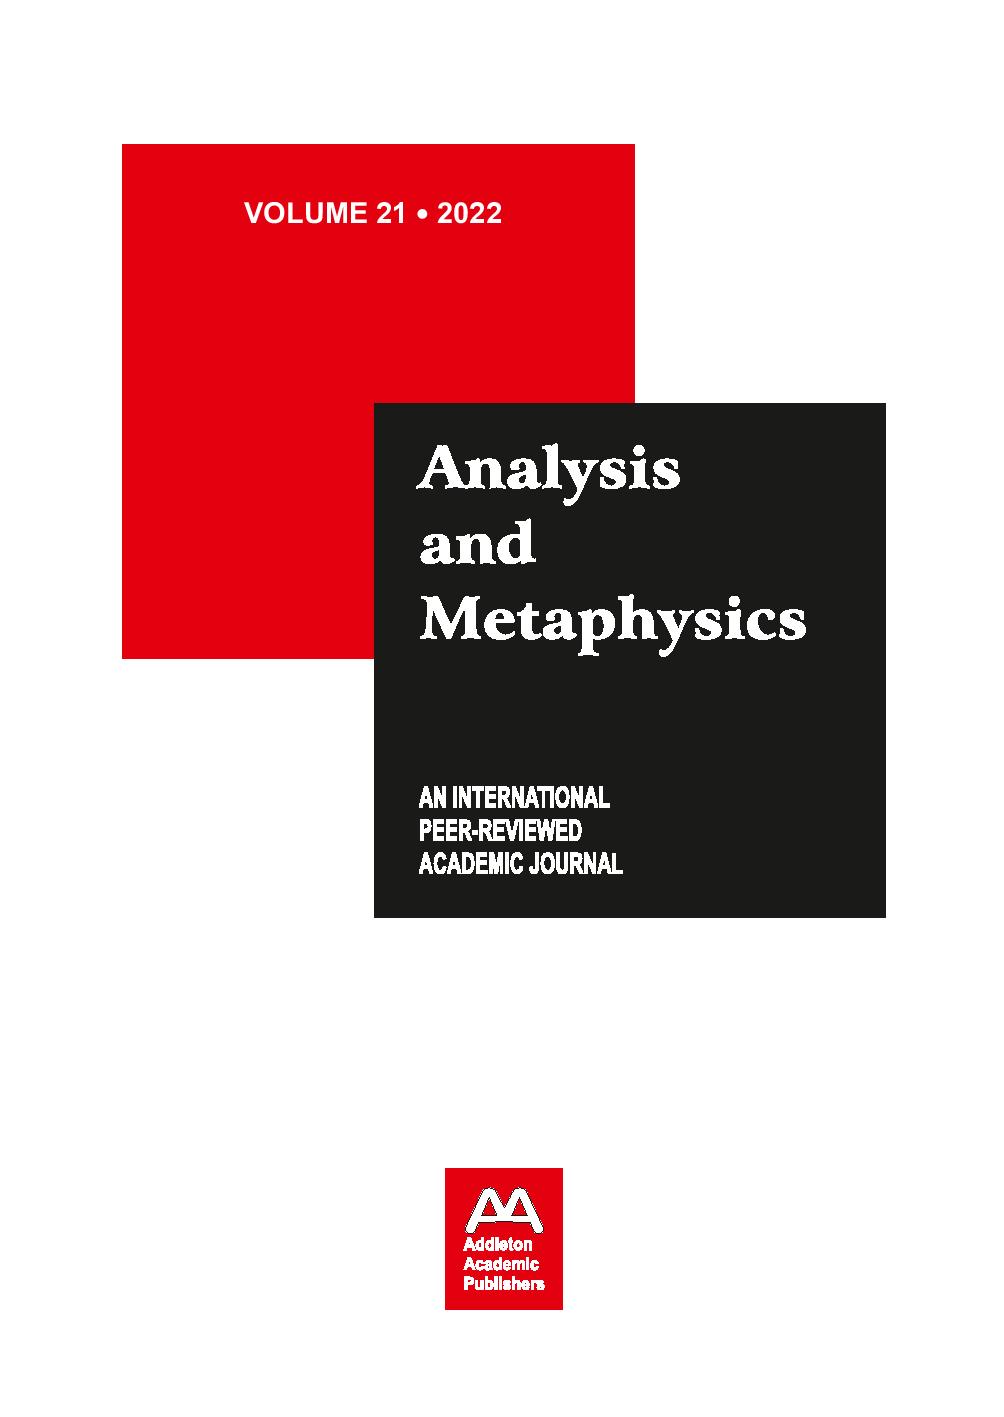 Spatial Cognition and Context Awareness Algorithms, Virtual Modeling and Remote Sensing Technologies, and Visual Perception and Data Mining Tools across the Economic Infrastructure of the Metaverse Cover Image